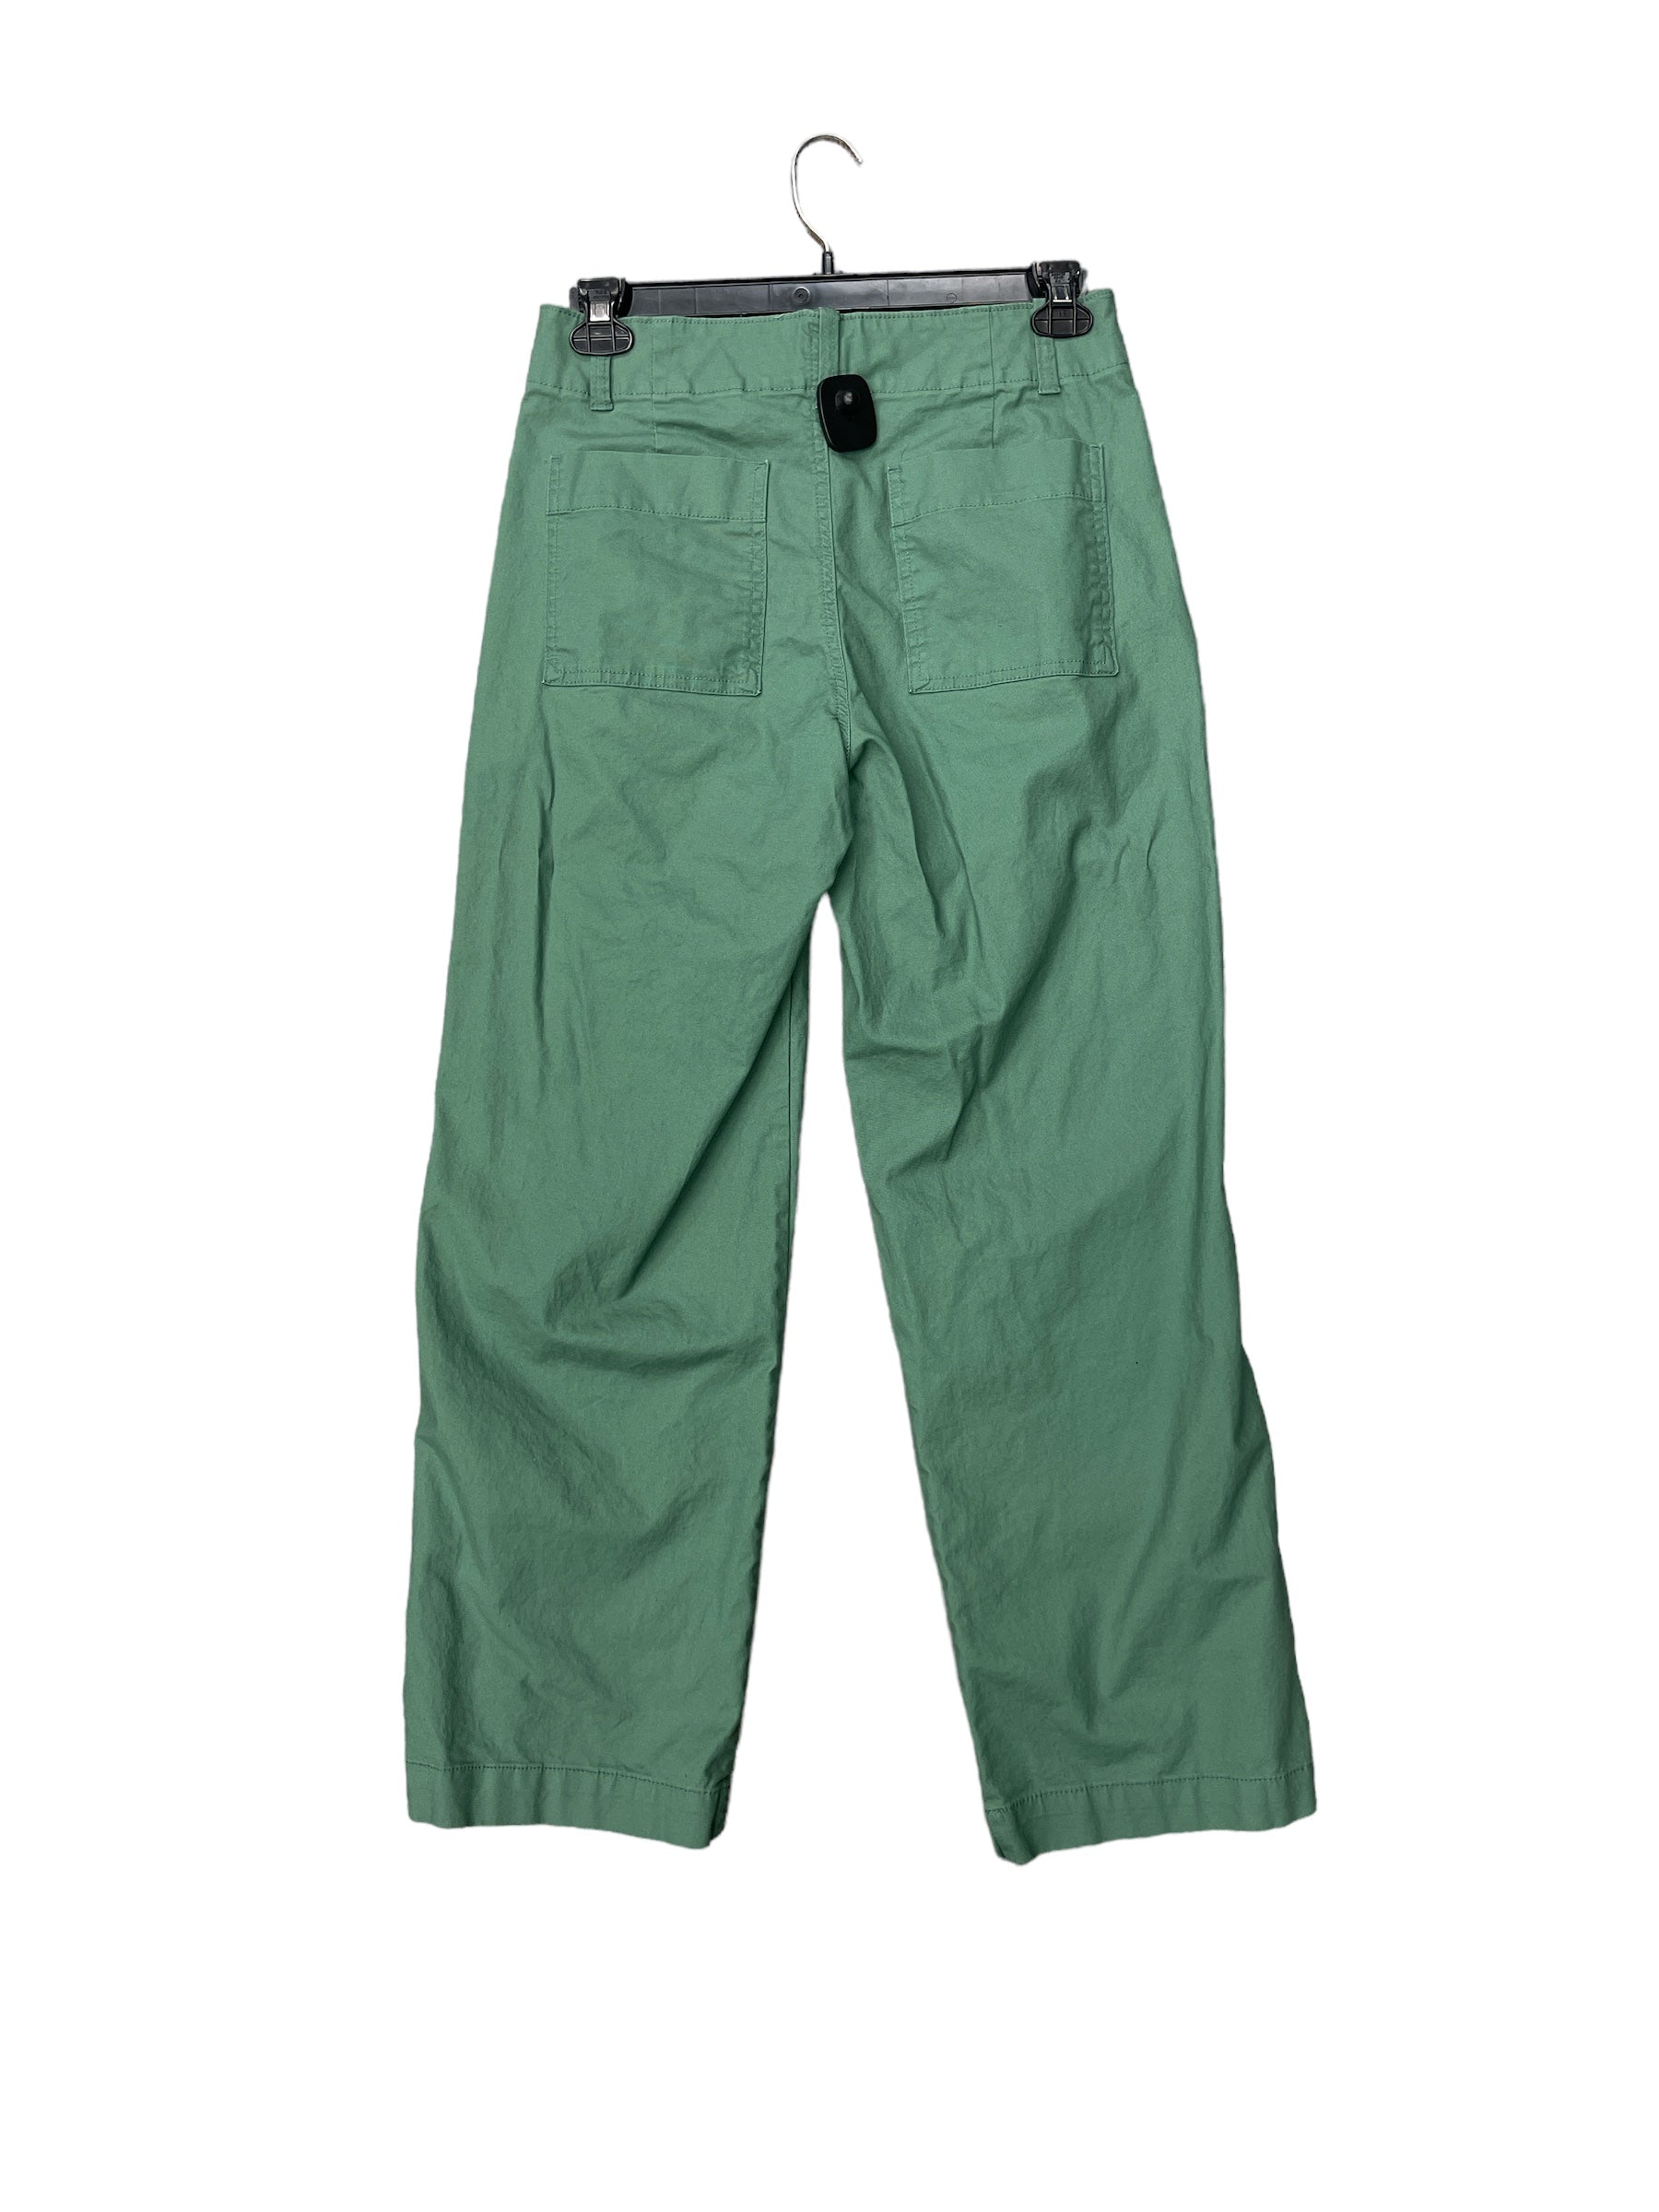 Pants Cargo & Utility By A New Day Size: 8